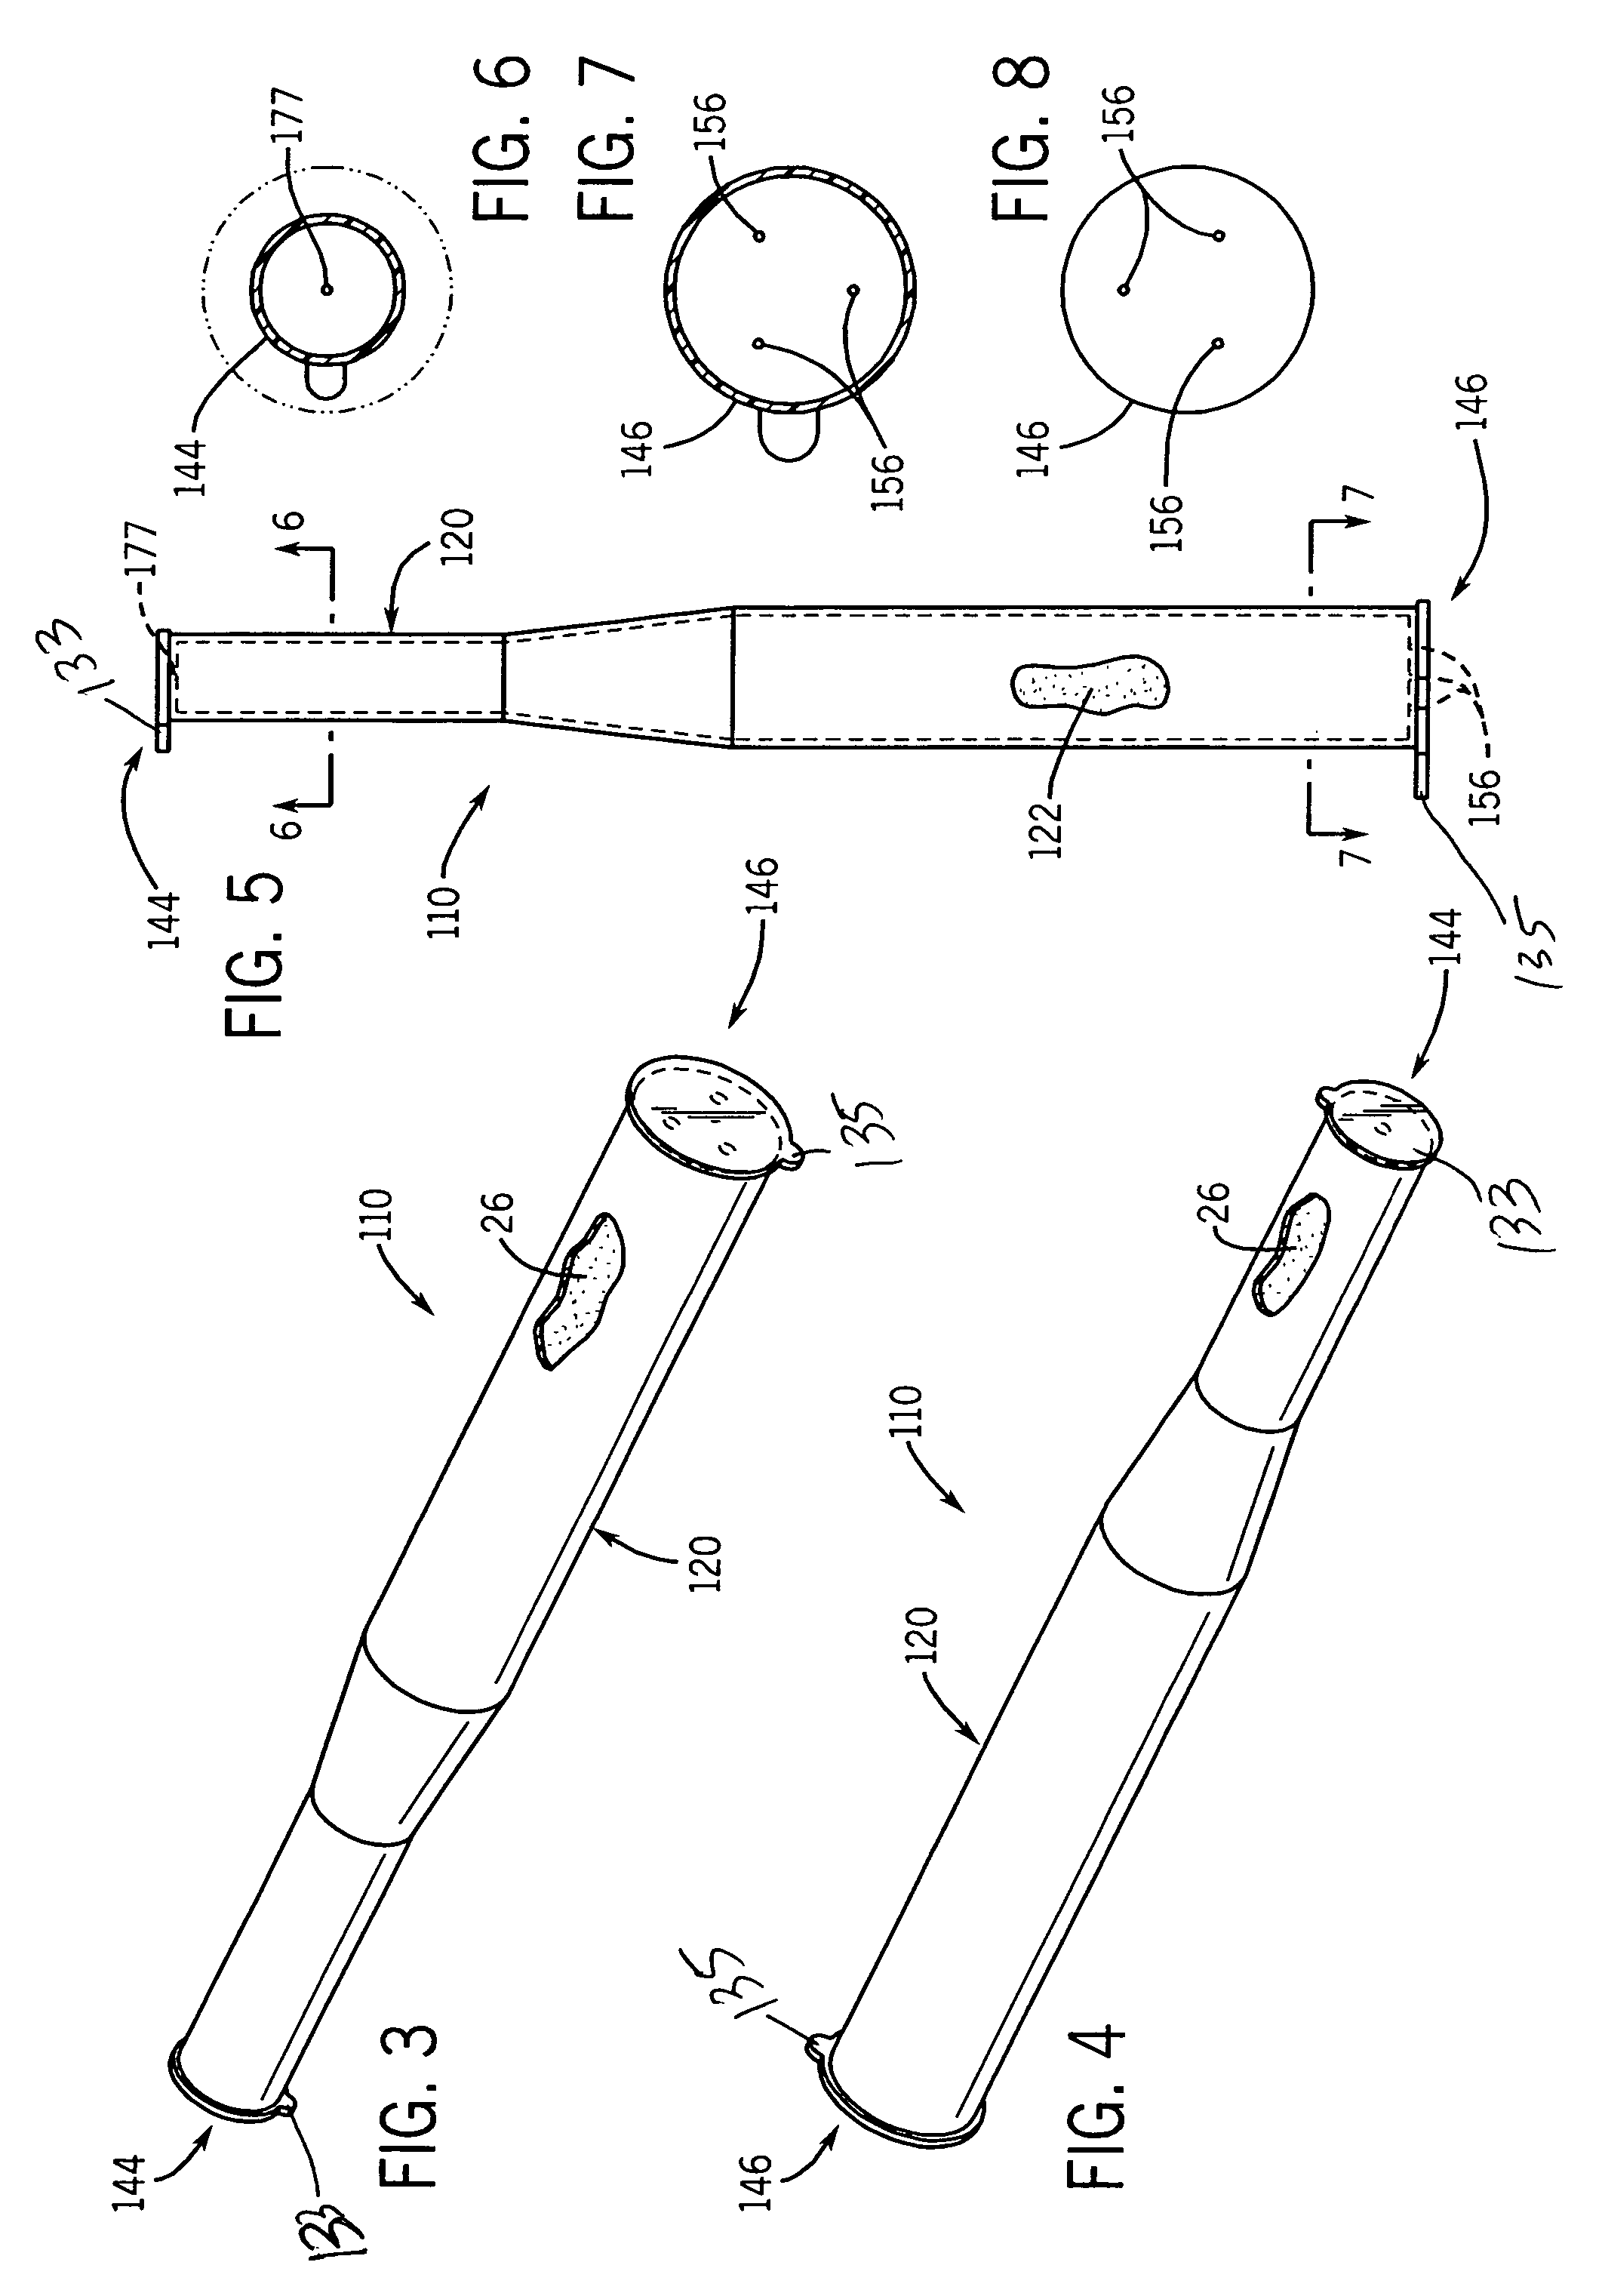 Device and composition for reducing the incidence of tobacco smoking